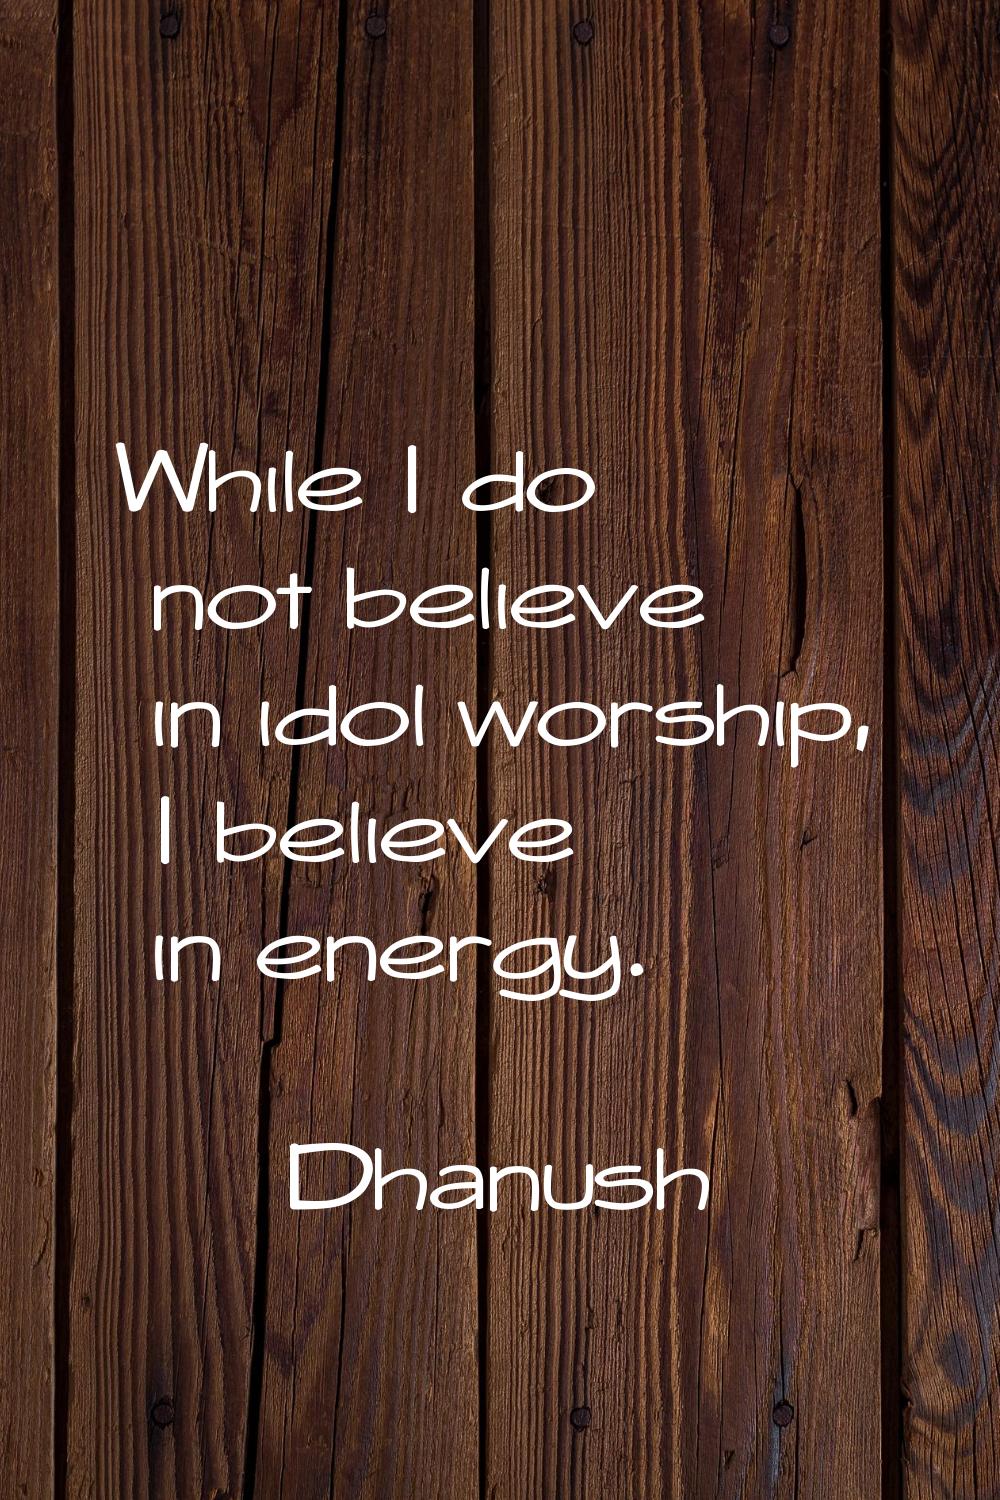 While I do not believe in idol worship, I believe in energy.